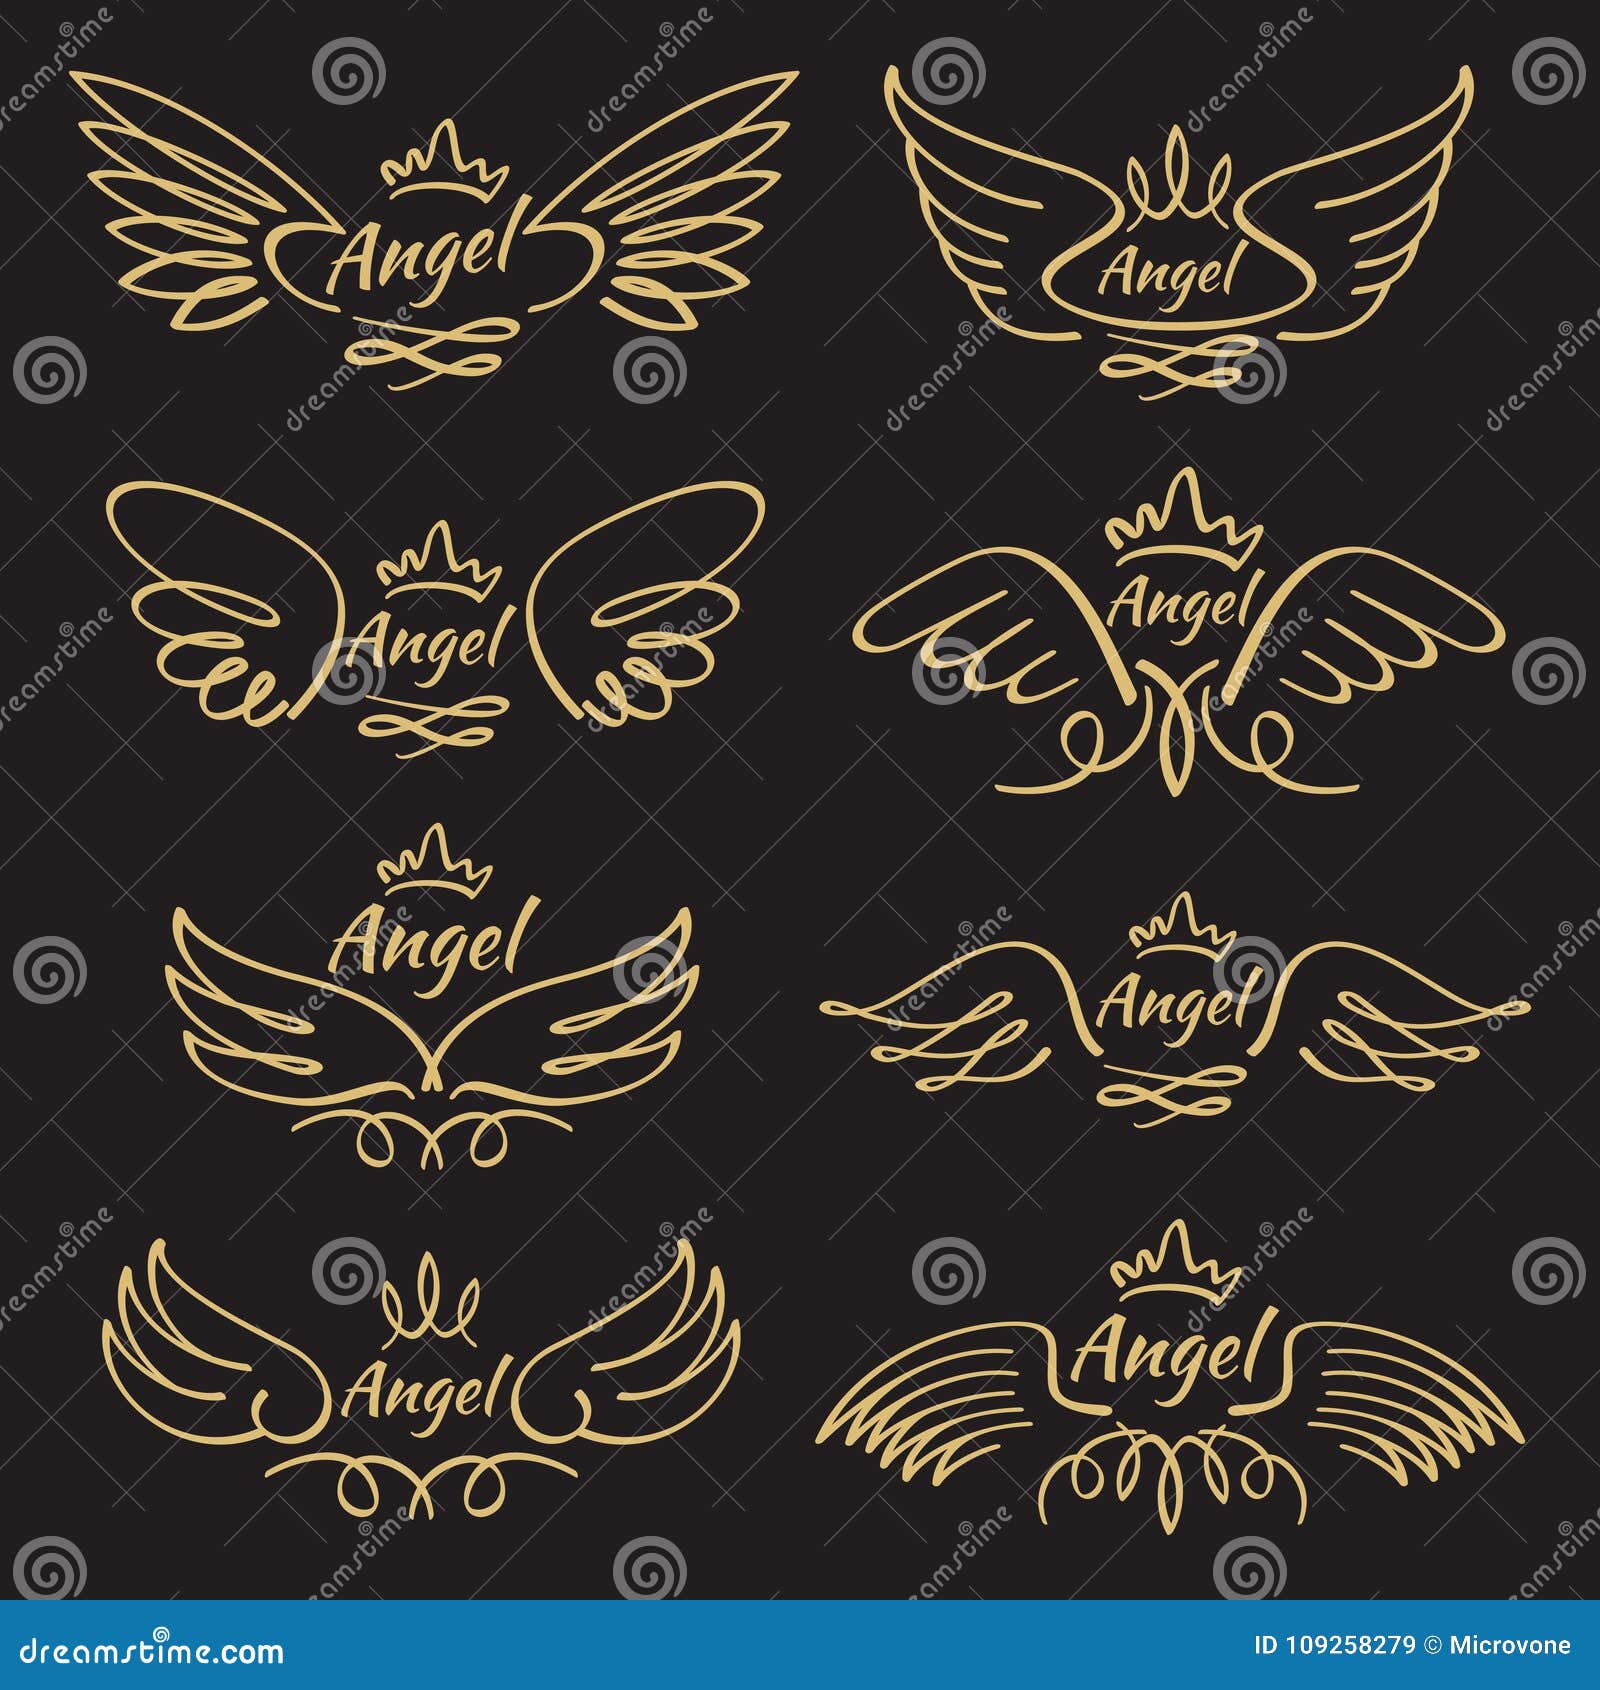 Elegance white and gold wings background Vector Image